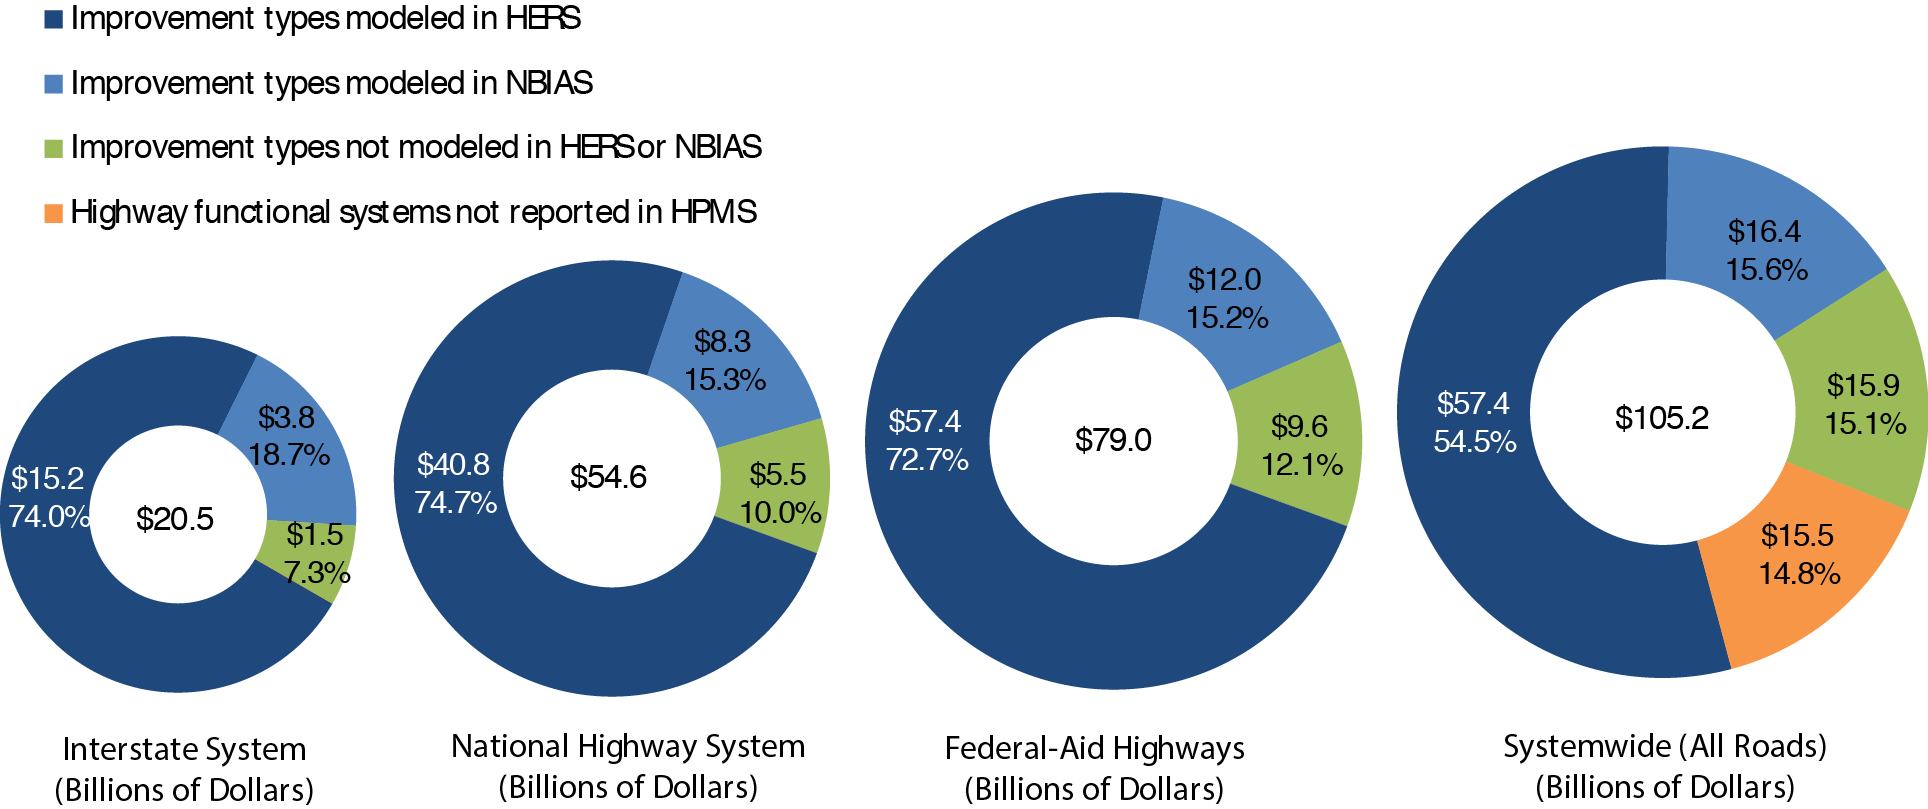 A set of four pie charts shows the distribution of capital expenditures in billions of dollars by investment type. For interstate system expenditures, which amount to $20.5 billion total, improvement types modeled in HERS account for $15.2 billion or 74.0 percent ; improvement types modeled in NBIAS account for $3.8 billion or 18.7 percent ; and improvement types not modeled in HERS or NBIAS account for $1.5 billion or 7.3 percent . For National Highway System expenditures, which amount to $54.6 billion total, improvement types modeled in HERS account for $40.8 billion or 74.7 percent ; improvement types modeled in NBIAS account for $8.3 billion or 15.3 percent ; and improvement types not modeled in HERS or NBIAS account for $5.5 billion or 10.0 percent . For Federal-aid highways expenditures, which amount to $79.0 billion total, improvement types modeled in HERS account for $57.4 billion or 72.7 percent ; improvement types modeled in NBIAS account for $12.0 billion or 15.2 percent ; and improvement types not modeled in HERS or NBIAS account for $9.6 billion or 12.1 percent . For system-wide (all roads) expenditures, which amount to $105.2 billion total, improvement types modeled in HERS account for $57.4 billion or 54.5 percent ; improvement types modeled in NBIAS account for $16.4 billion or 15.6 percent ; improvement types not modeled in HERS or NBIAS account for $15.9 billion or 15.1 percent ; and highway functional systems not reported in HPMS account for $15.5 billion or 14.8 percent . Source: Highway Statistics 2012 (Table SF-12A) and unpublished FHWA data. 